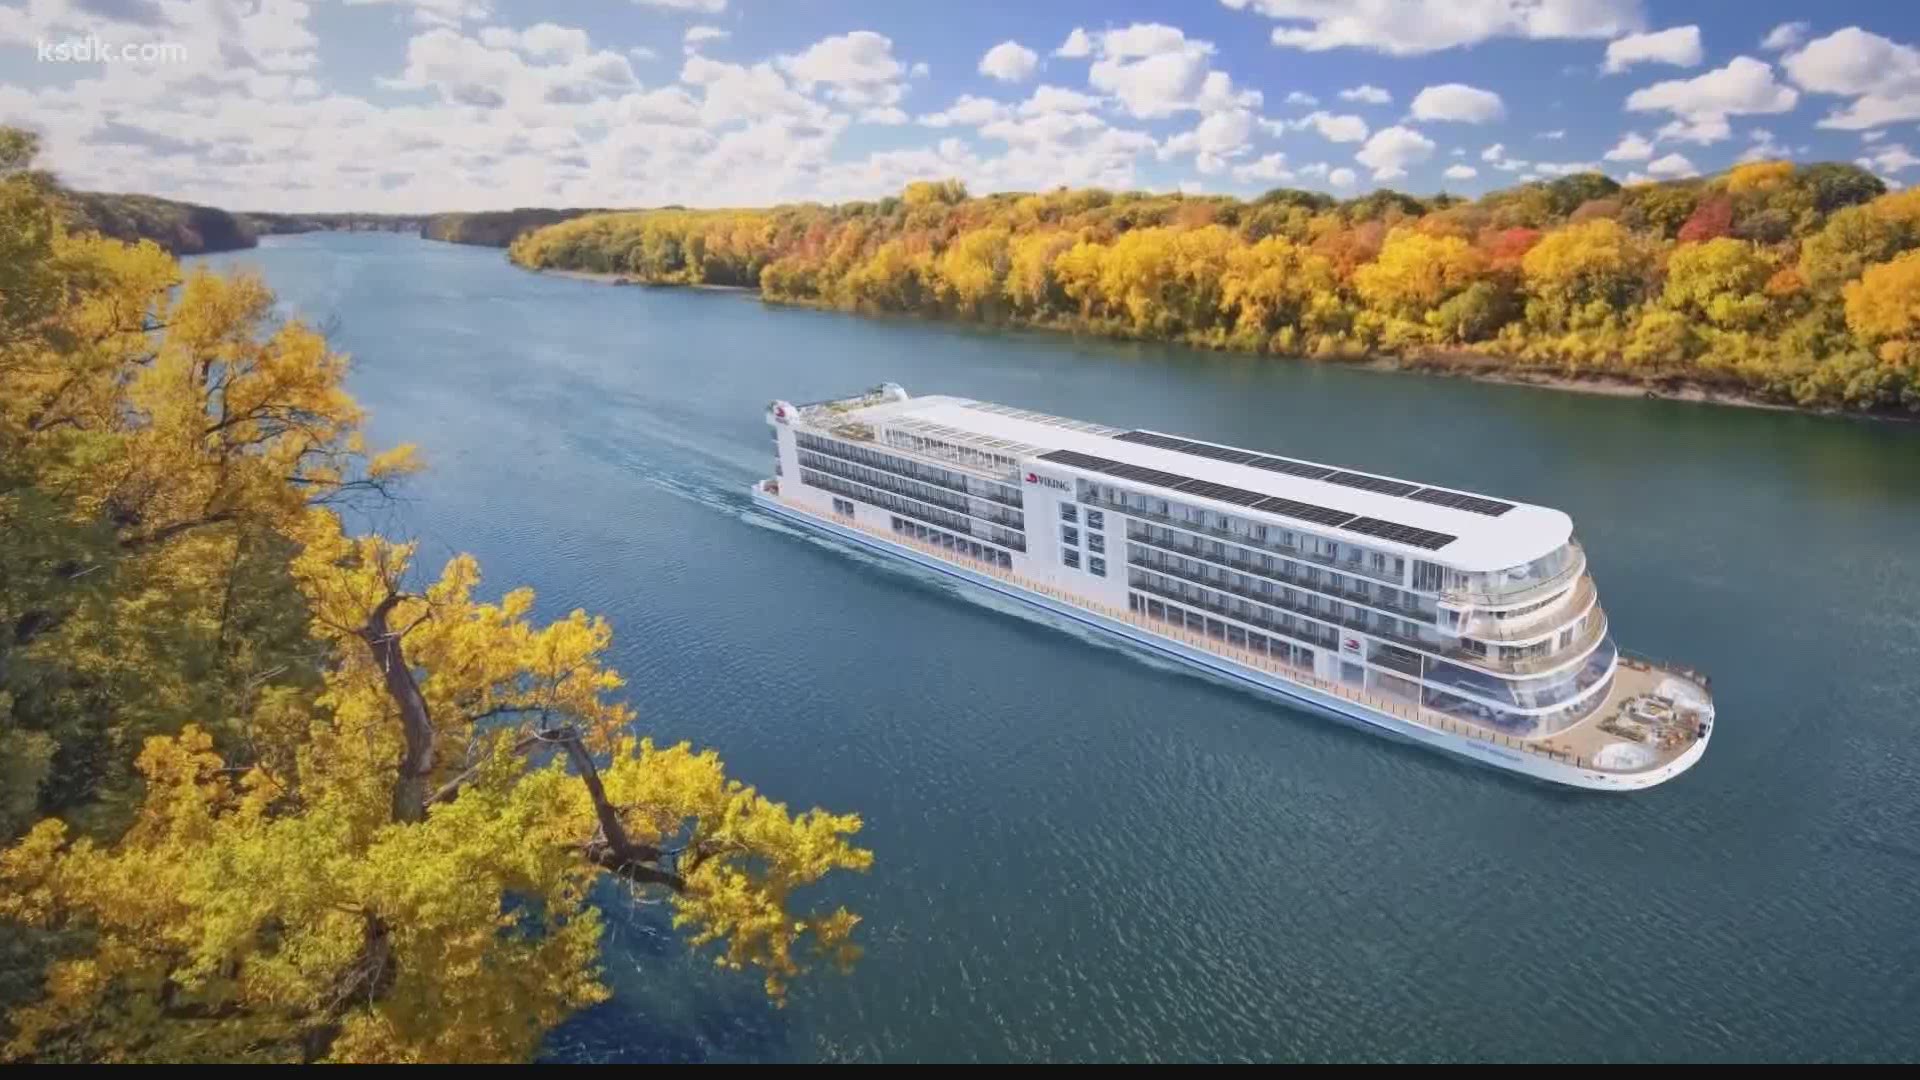 You can book your Mississippi voyage on Viking now for 2023.